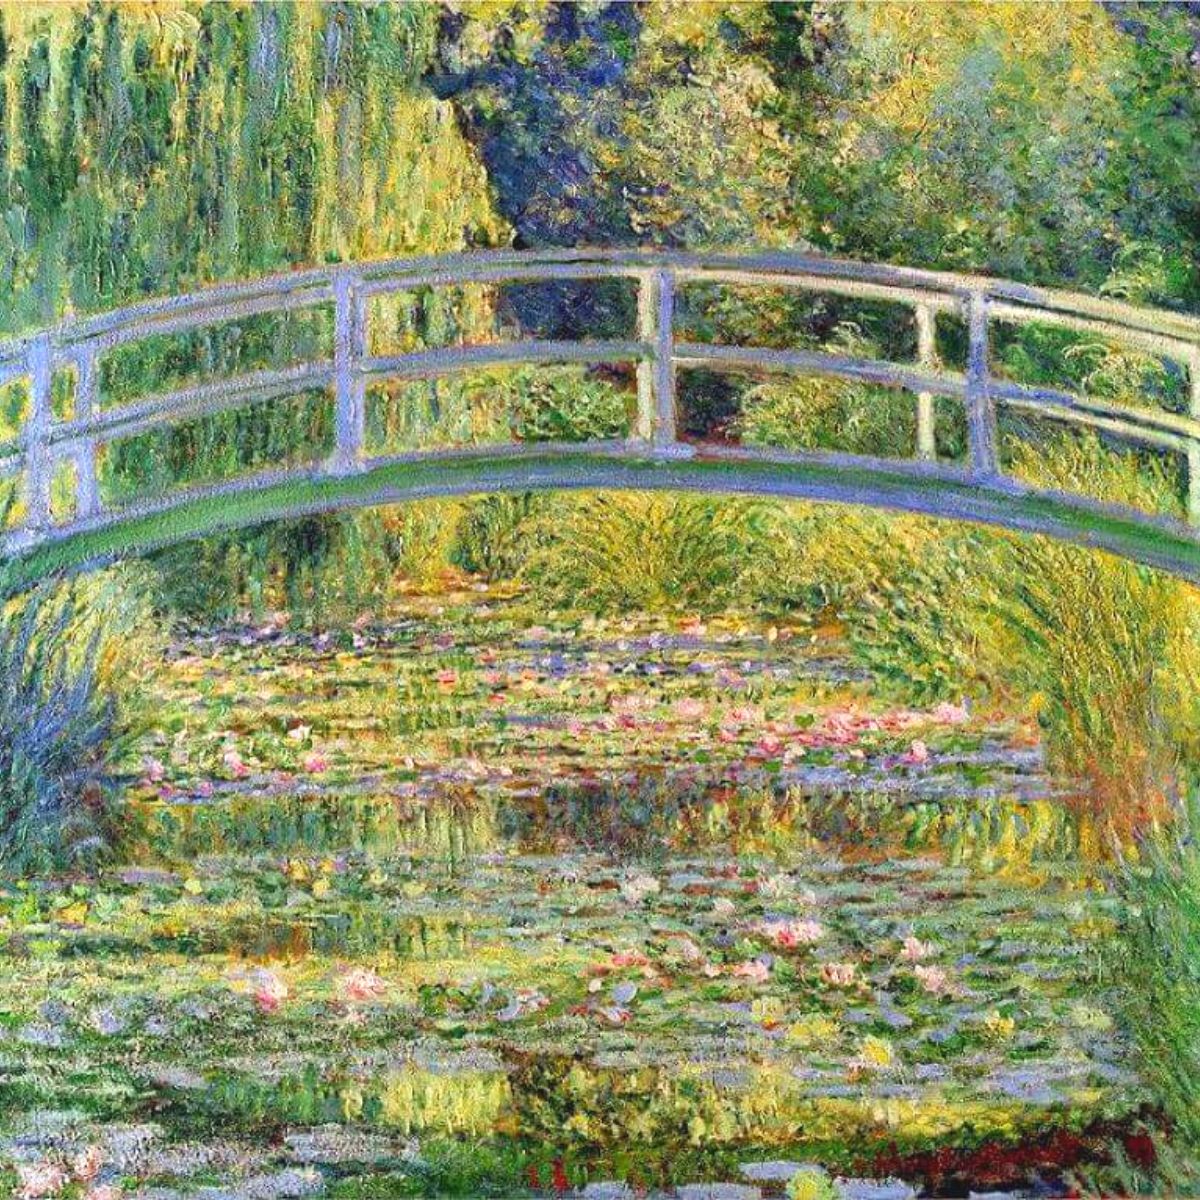 By the 1890s, Monet's financial woes had passed him by, and he was able to purchase Giverny - in fact, he had established some riches and was able to lavish his money on his own home and garden for the first time. It would result in a gorgeous and one-of-a-kind property, complete with the artist's most intriguing garden and its Water Lily Pond. Planning authorization was given in 1893, and he focused much of his attention in his efforts on the bridge. Up until 1897, he only painted roughly three pieces of the lily pond. 